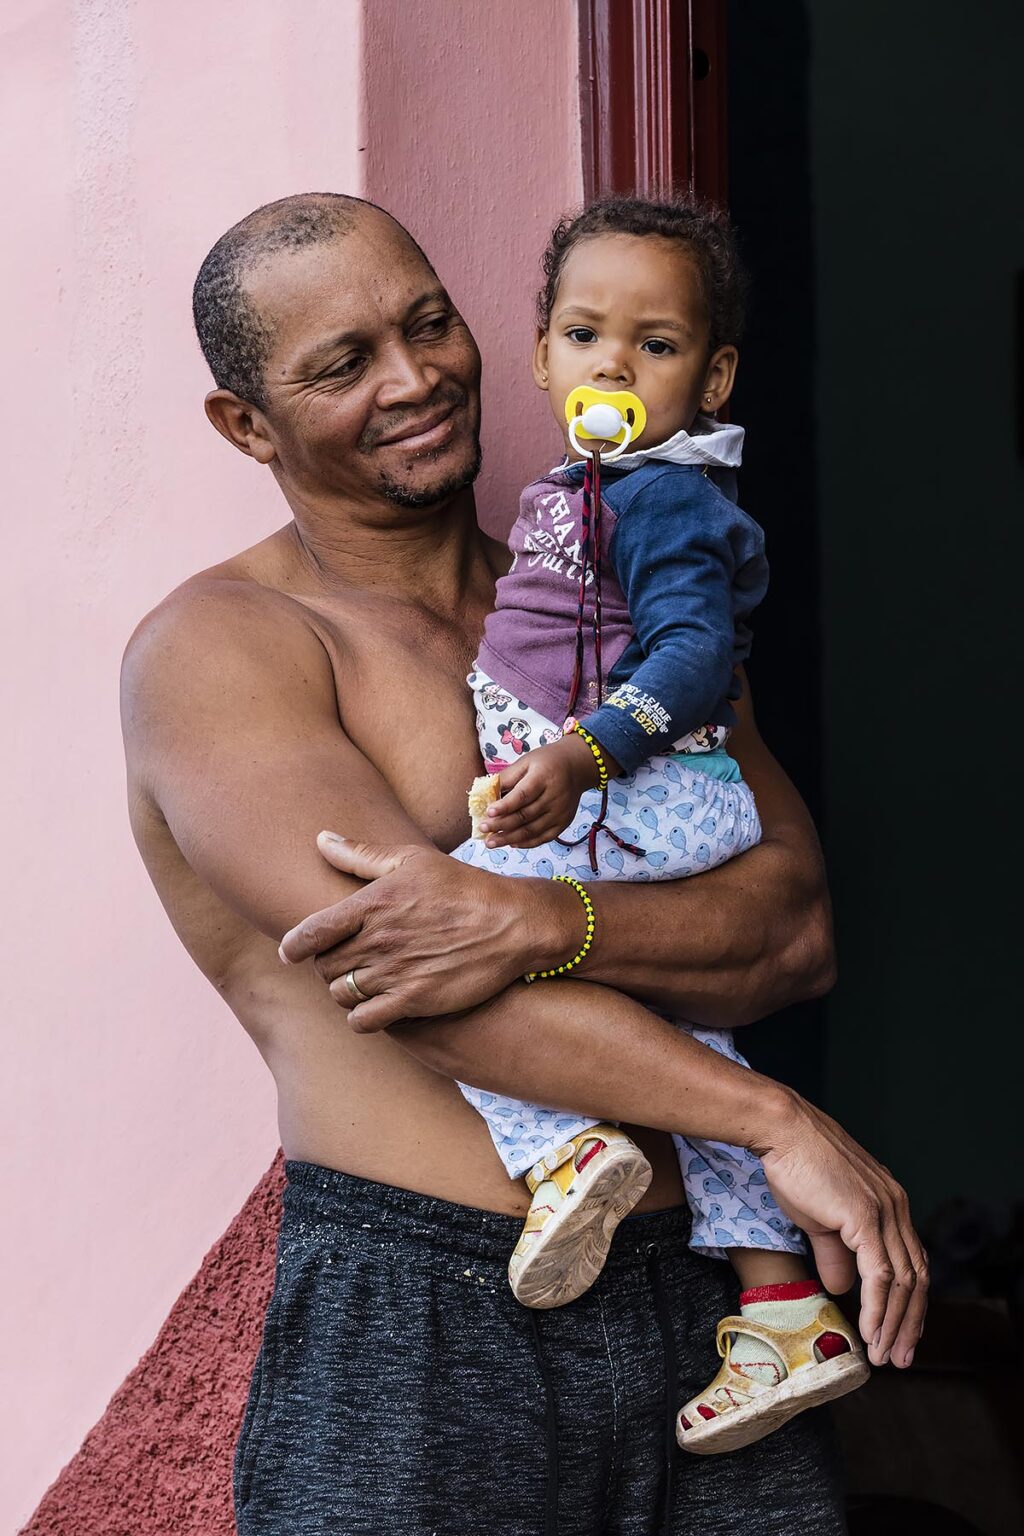 A FATHER holds his baby daughter in a doorway - TRINIDAD, CUBA